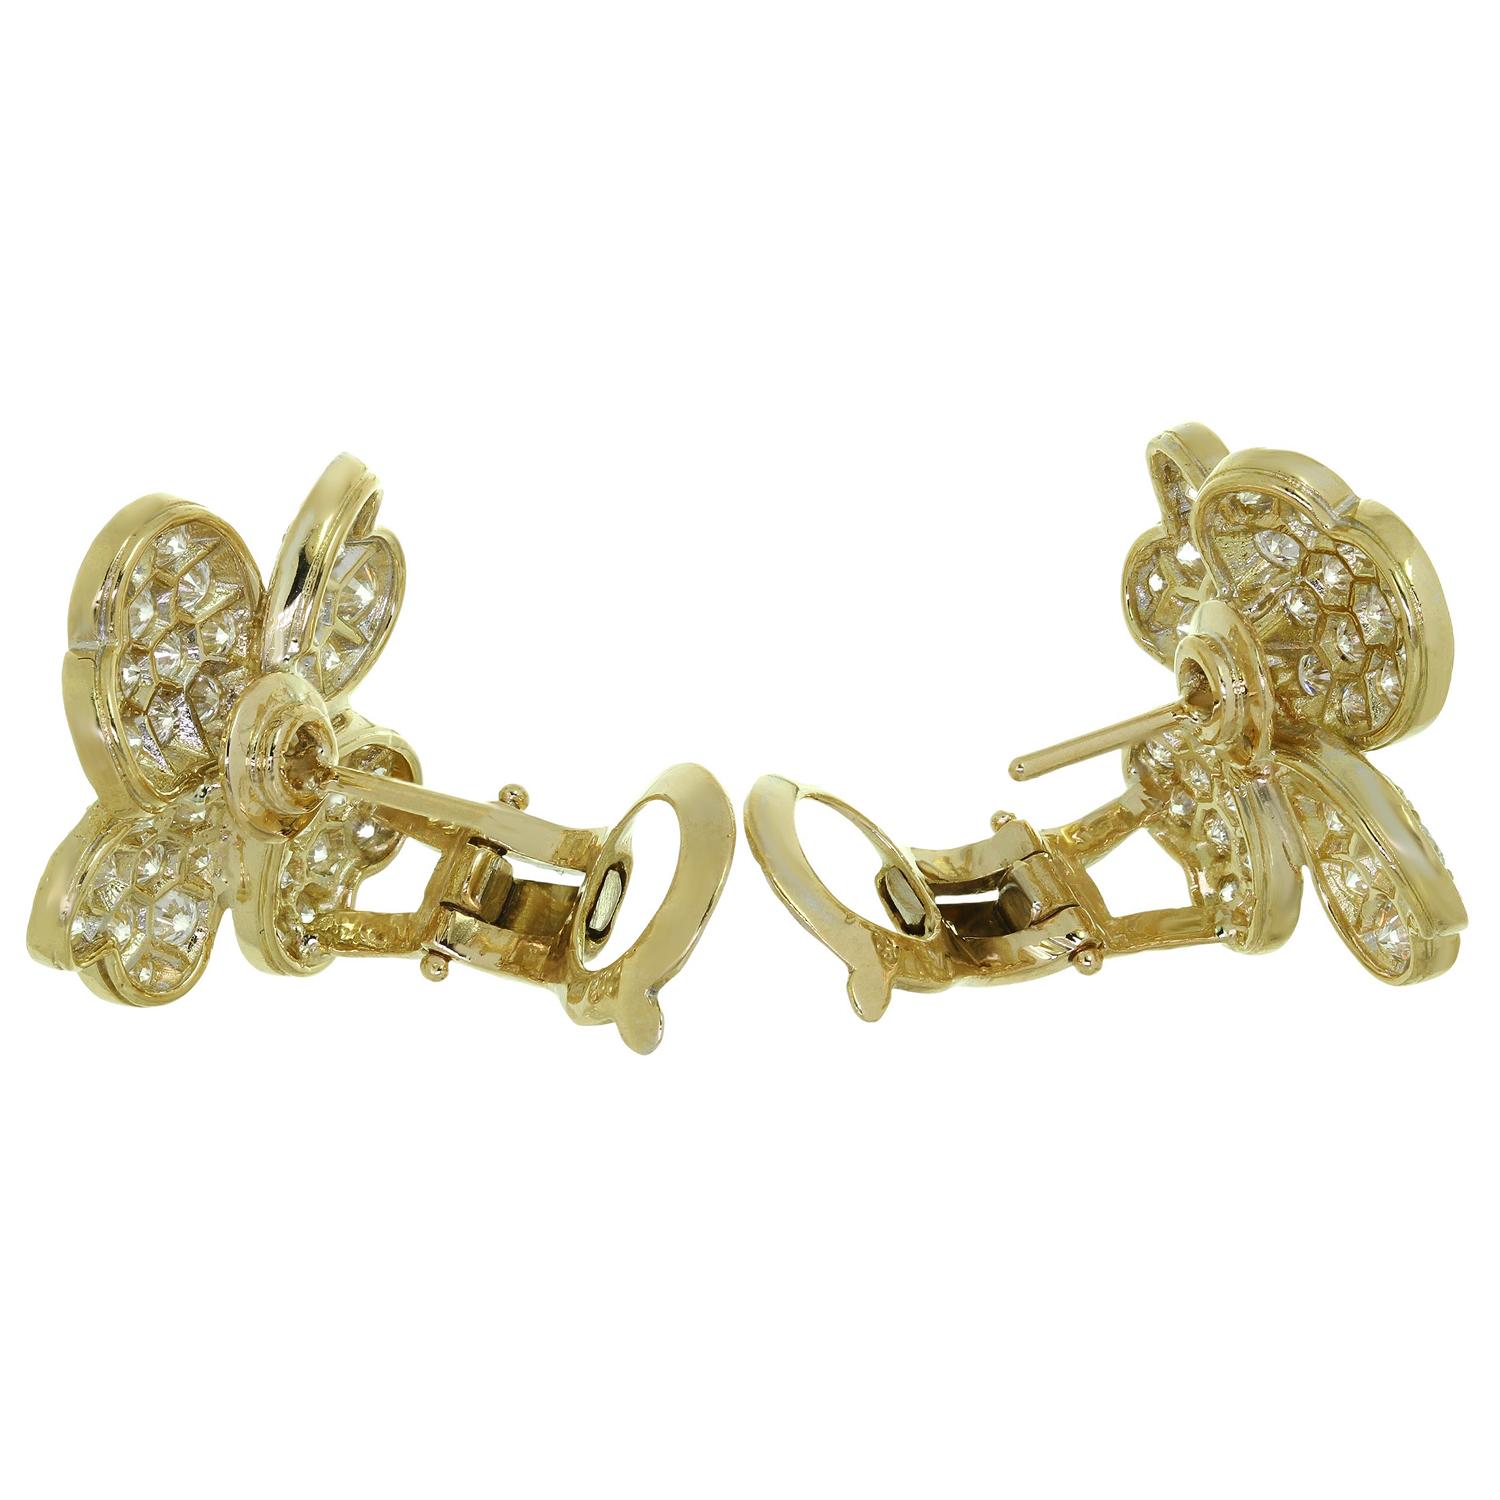 These rare Van Cleef & Arpels 4-petal flower earrings from the gorgeous Cosmos collection feature a flower design crafted in 18k yellow gold and set with round brilliant D-E-F VVS1-VVS2 diamonds weighing an estimated 3.0 carats. This is the medium